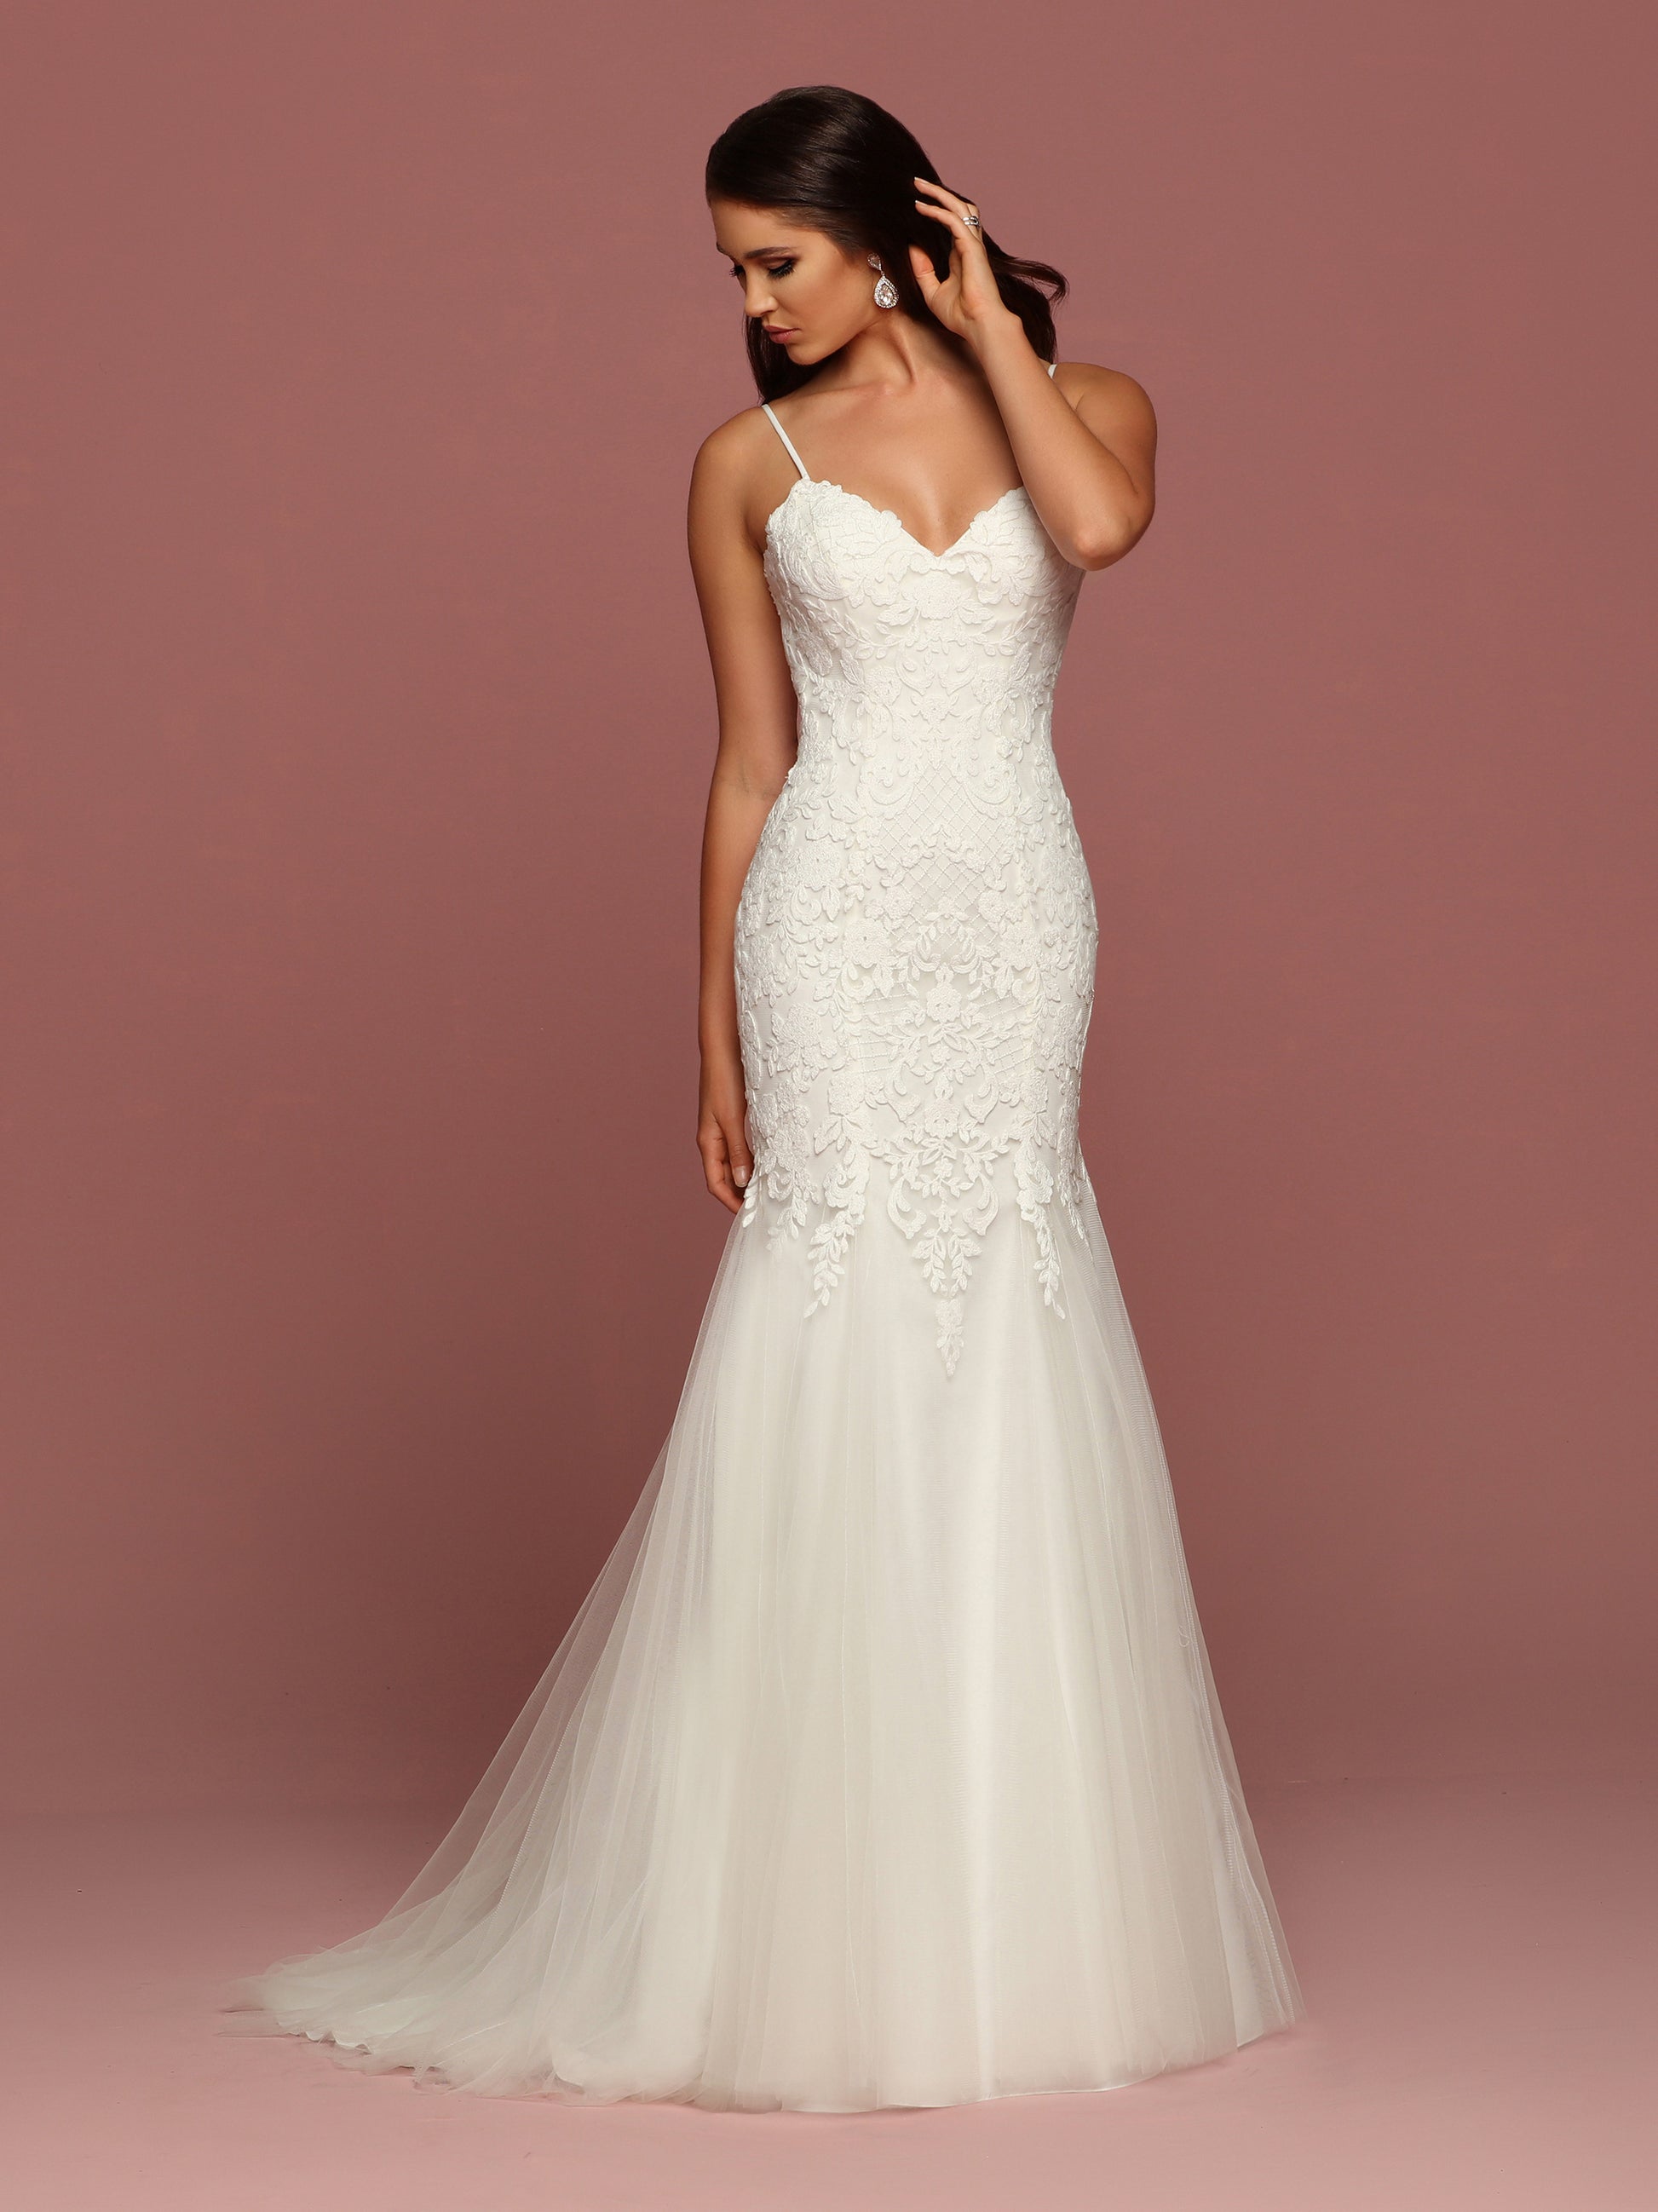 Davinci Bridal 50498 is a Fitted Mermaid Wedding dress. The bodice is adorned with lace that cascades into the tulle trumpet skirt. V Neck with spaghetti straps.  Available for 1-2 Week Delivery!!!  Available Sizes: 2,4,6,8,10,12,14,16,18,20  Available Colors: Ivory